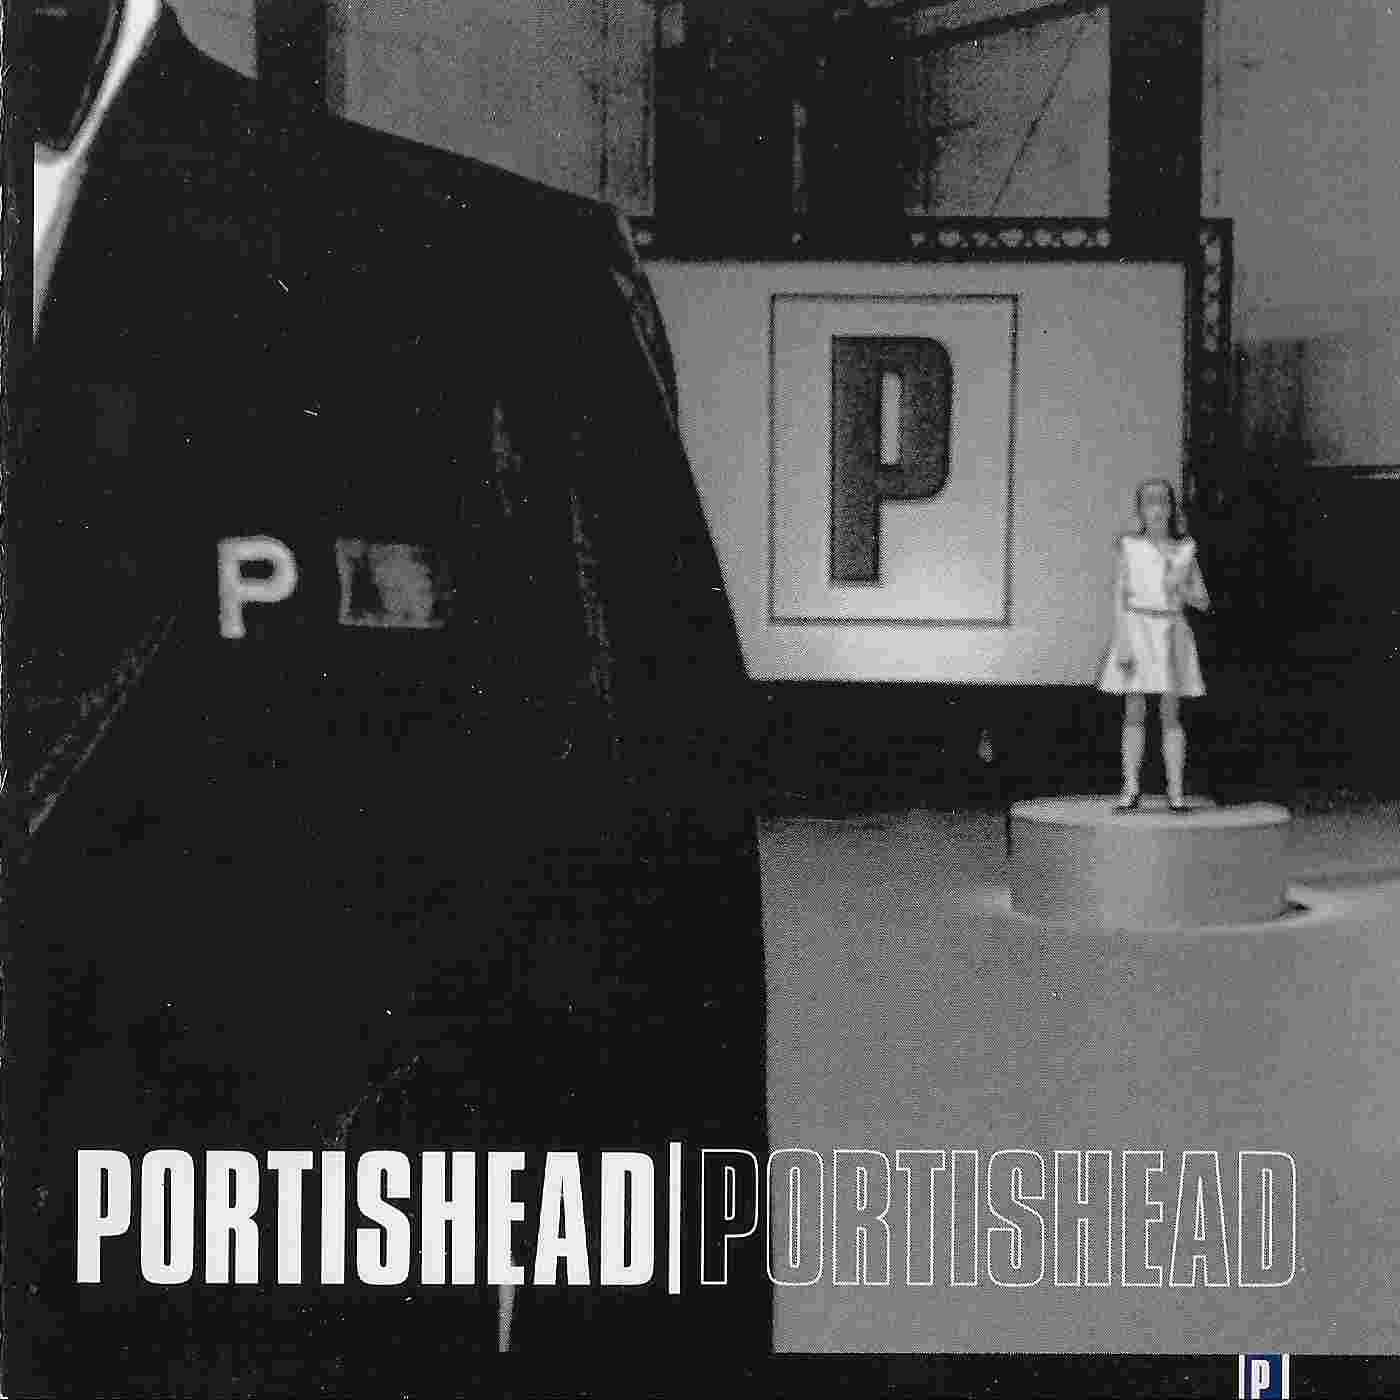 Picture of Portishead by artist Portishead  